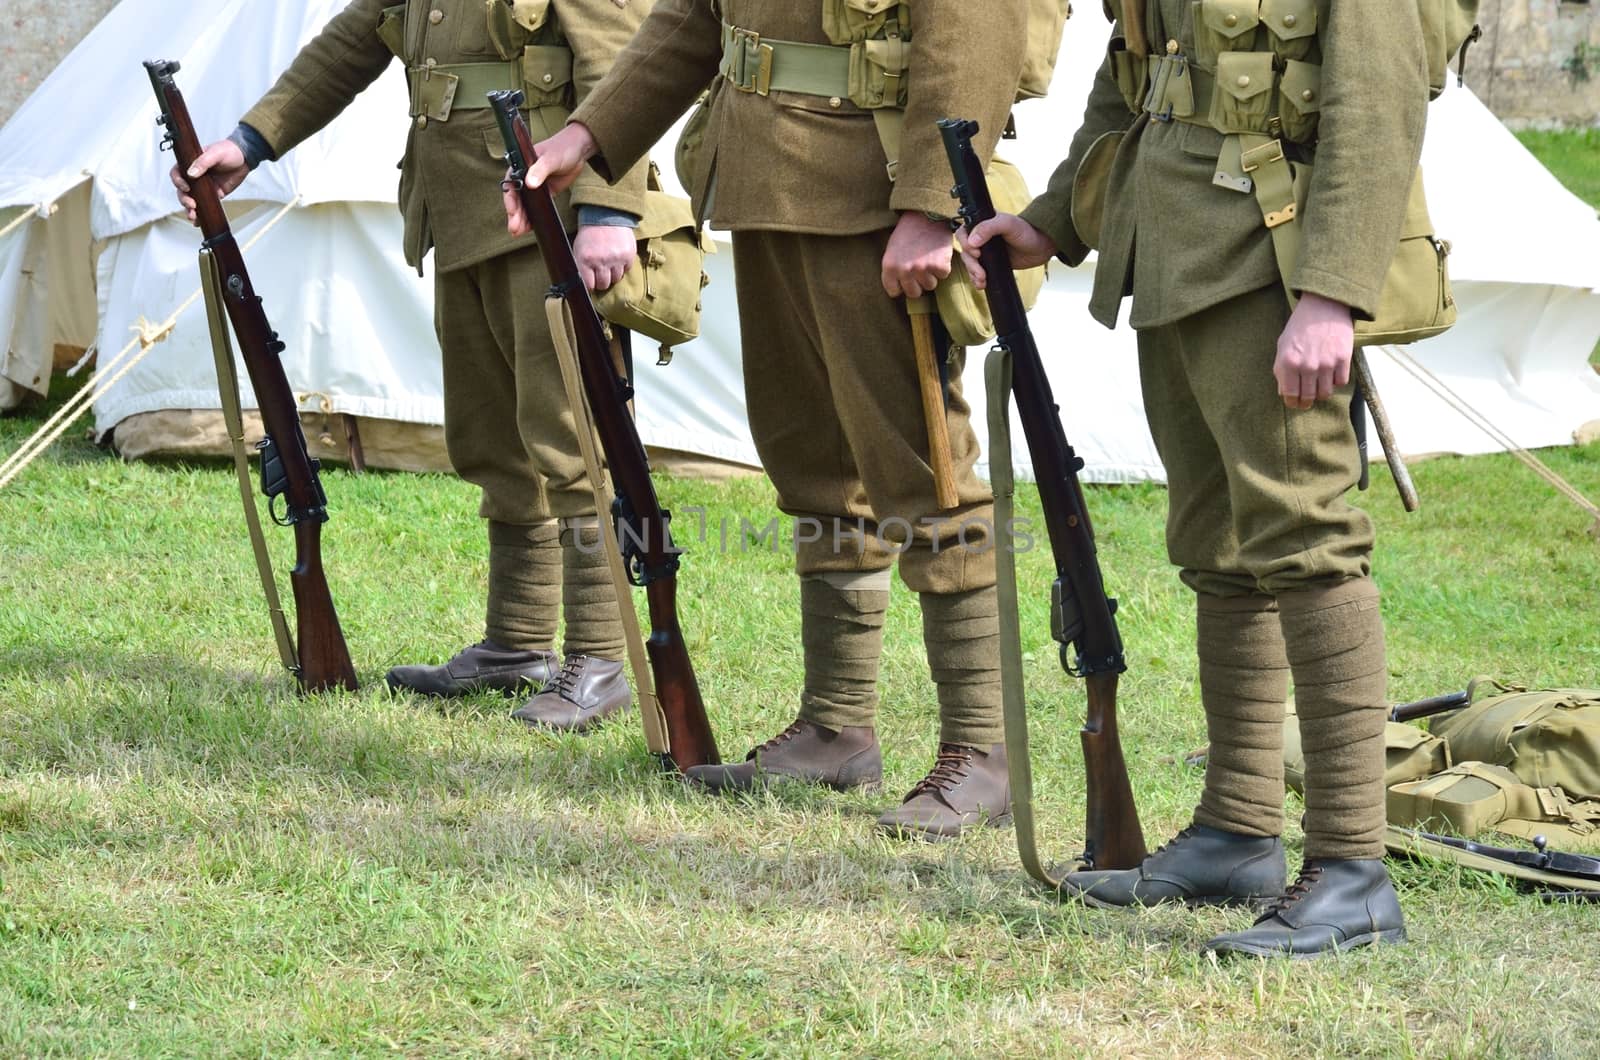 Row of soldiers standing with guns